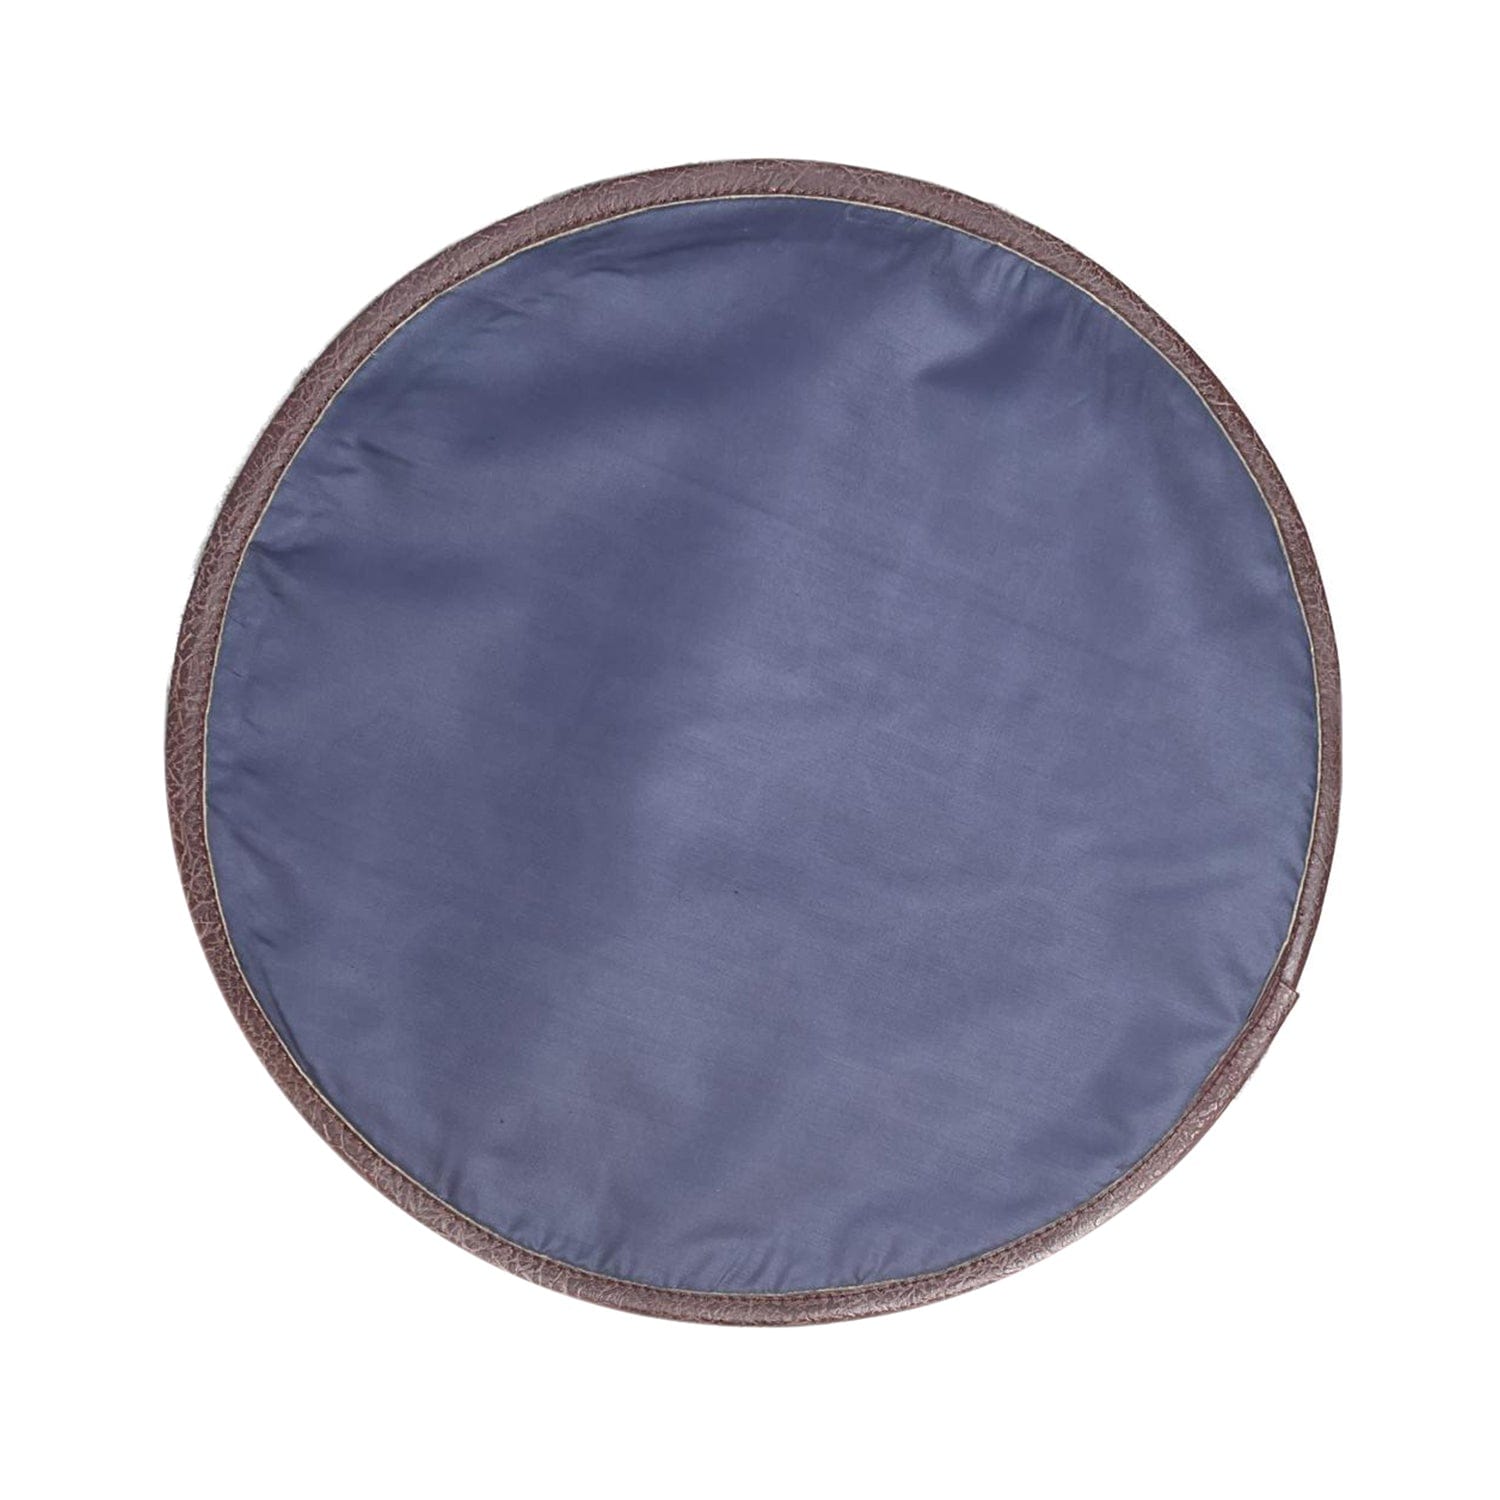 Mona B Set of 2 Printed Placemats, 13 INCH Round, Best for Bed-Side Table/Center Table, Dining Table/Shelves - BR-305 (1319) - Placemat by Mona-B - Shop1999, Shop2999, Shop3999